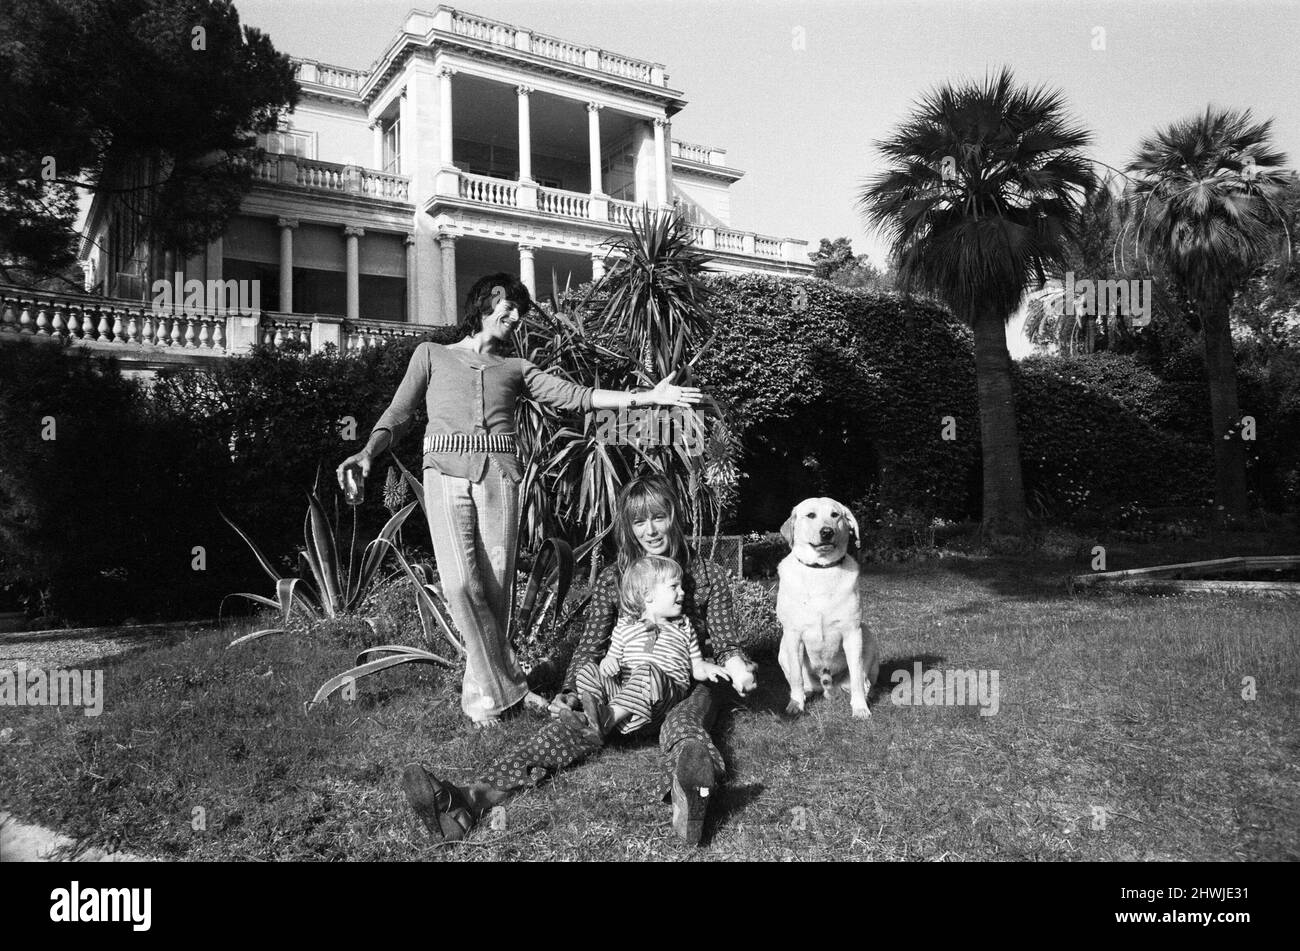 Keith Richard & Anita Pallenberg with their son Marlon at his home, the rented Villa Nellcôte, a 19th century sixteen-room mansion on the waterfront of Villefranche-sur-Mer in the Côte d'Azur where the band recorded Exile on Main Street May 1971. Stock Photo